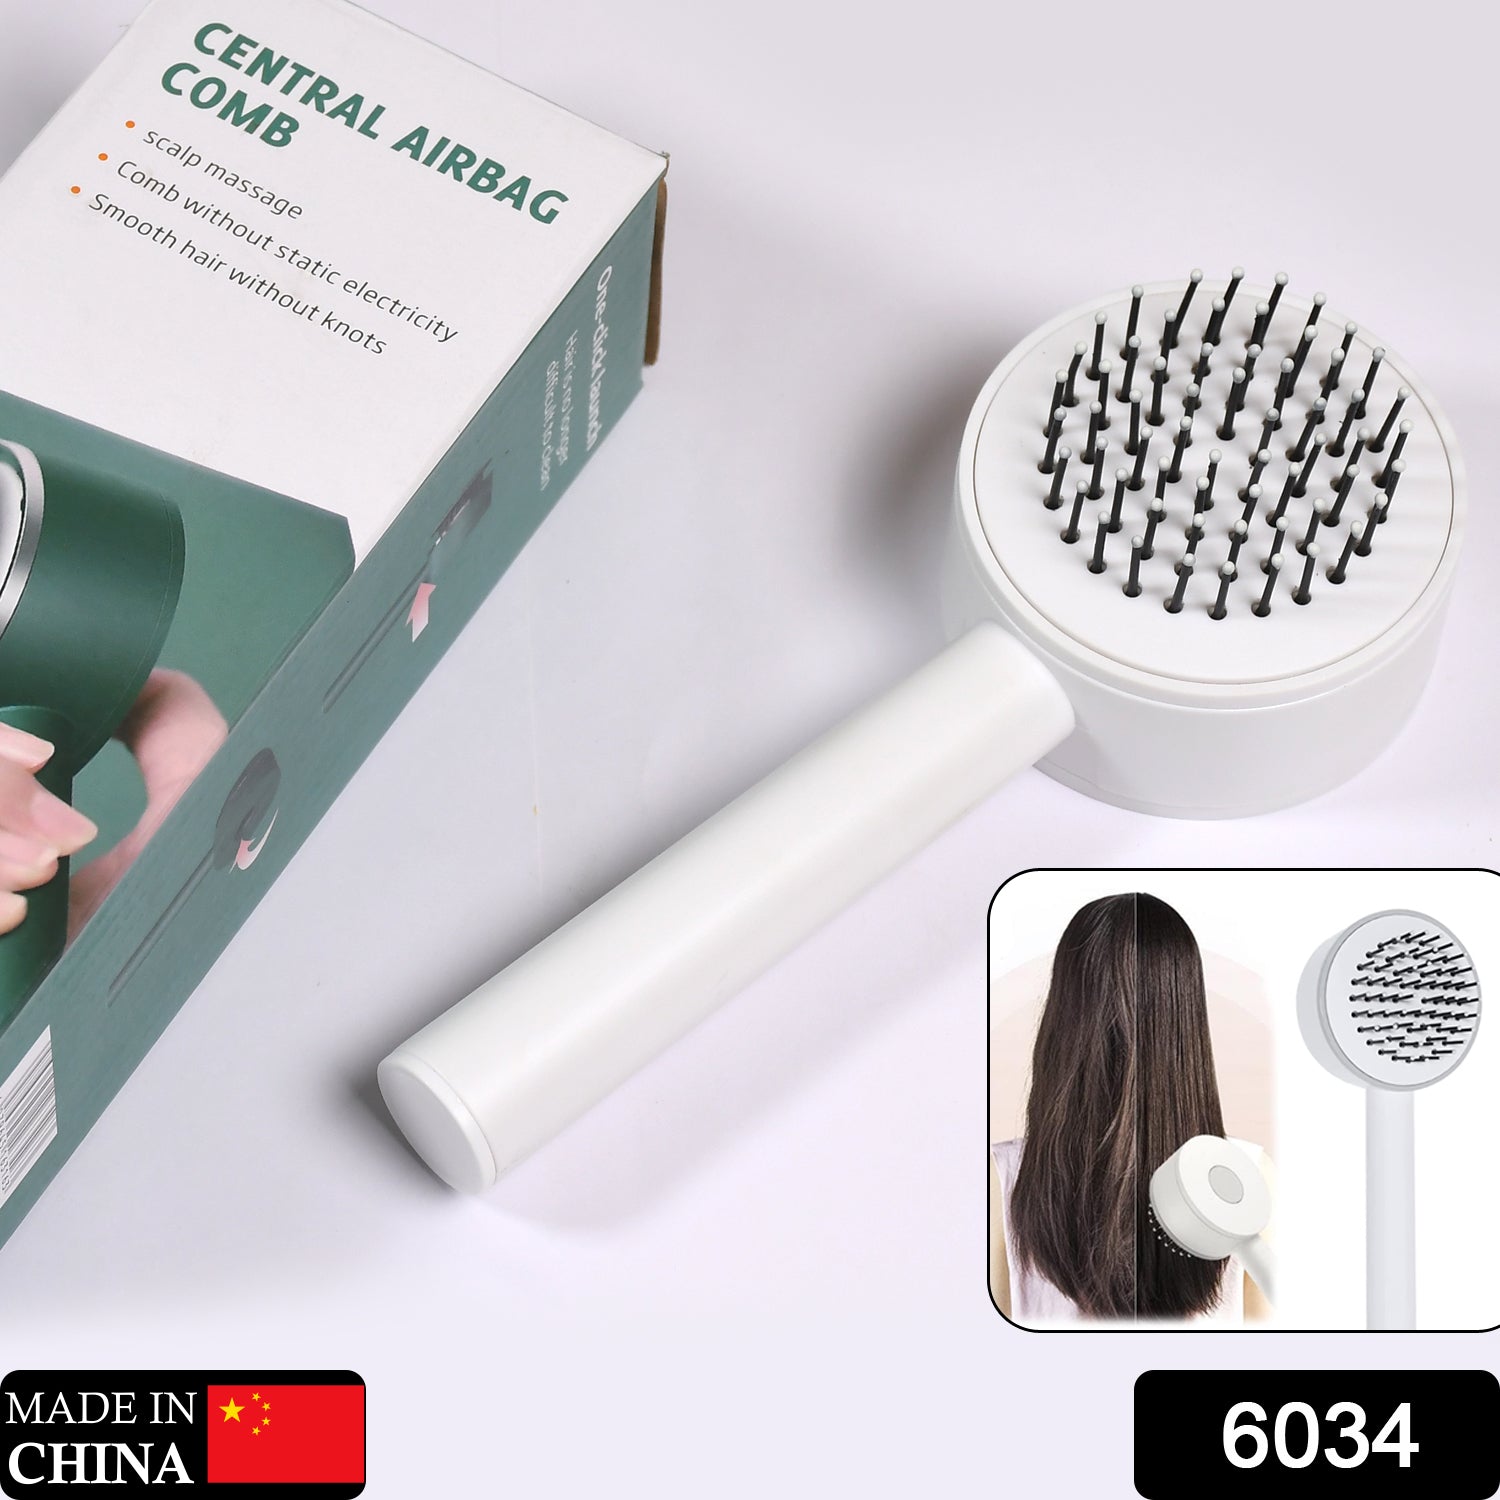 6034﻿ Air Cushion Massage Brush, Airbag Massage Comb with Long Handle, Self-Cleaning Hair Brush, Detangling Anti-Static for All Hair DeoDap